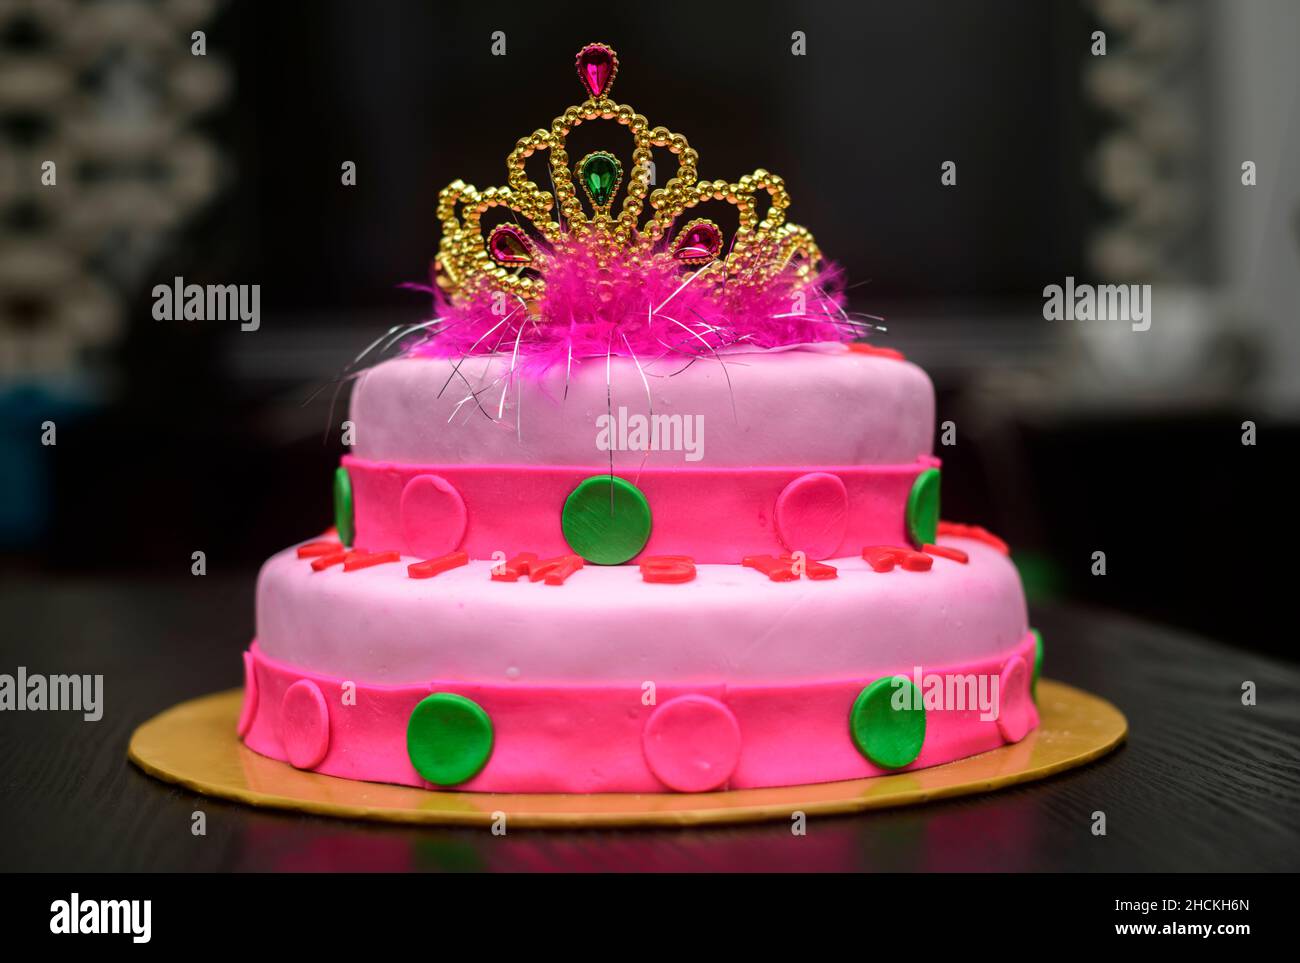 Two-tier fondant cake design with a tiara on top, decorated with icing flowers. Delicious pink-red color-themed round cake on yellow cake tray against Stock Photo